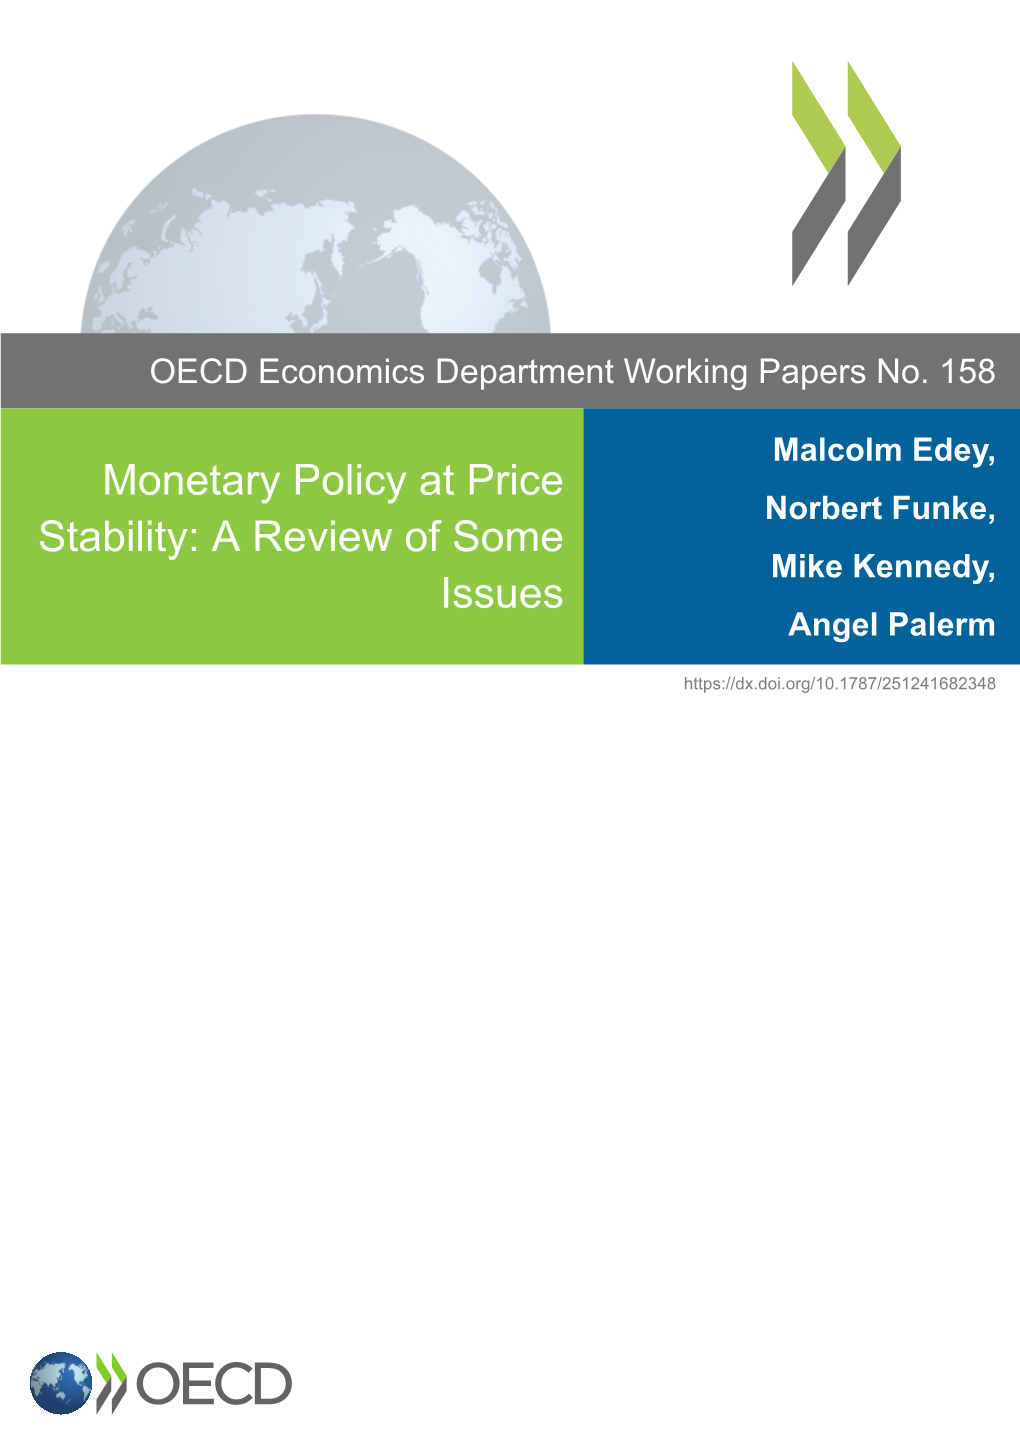 Monetary Policy at Price Stability: a Review of Some Issues